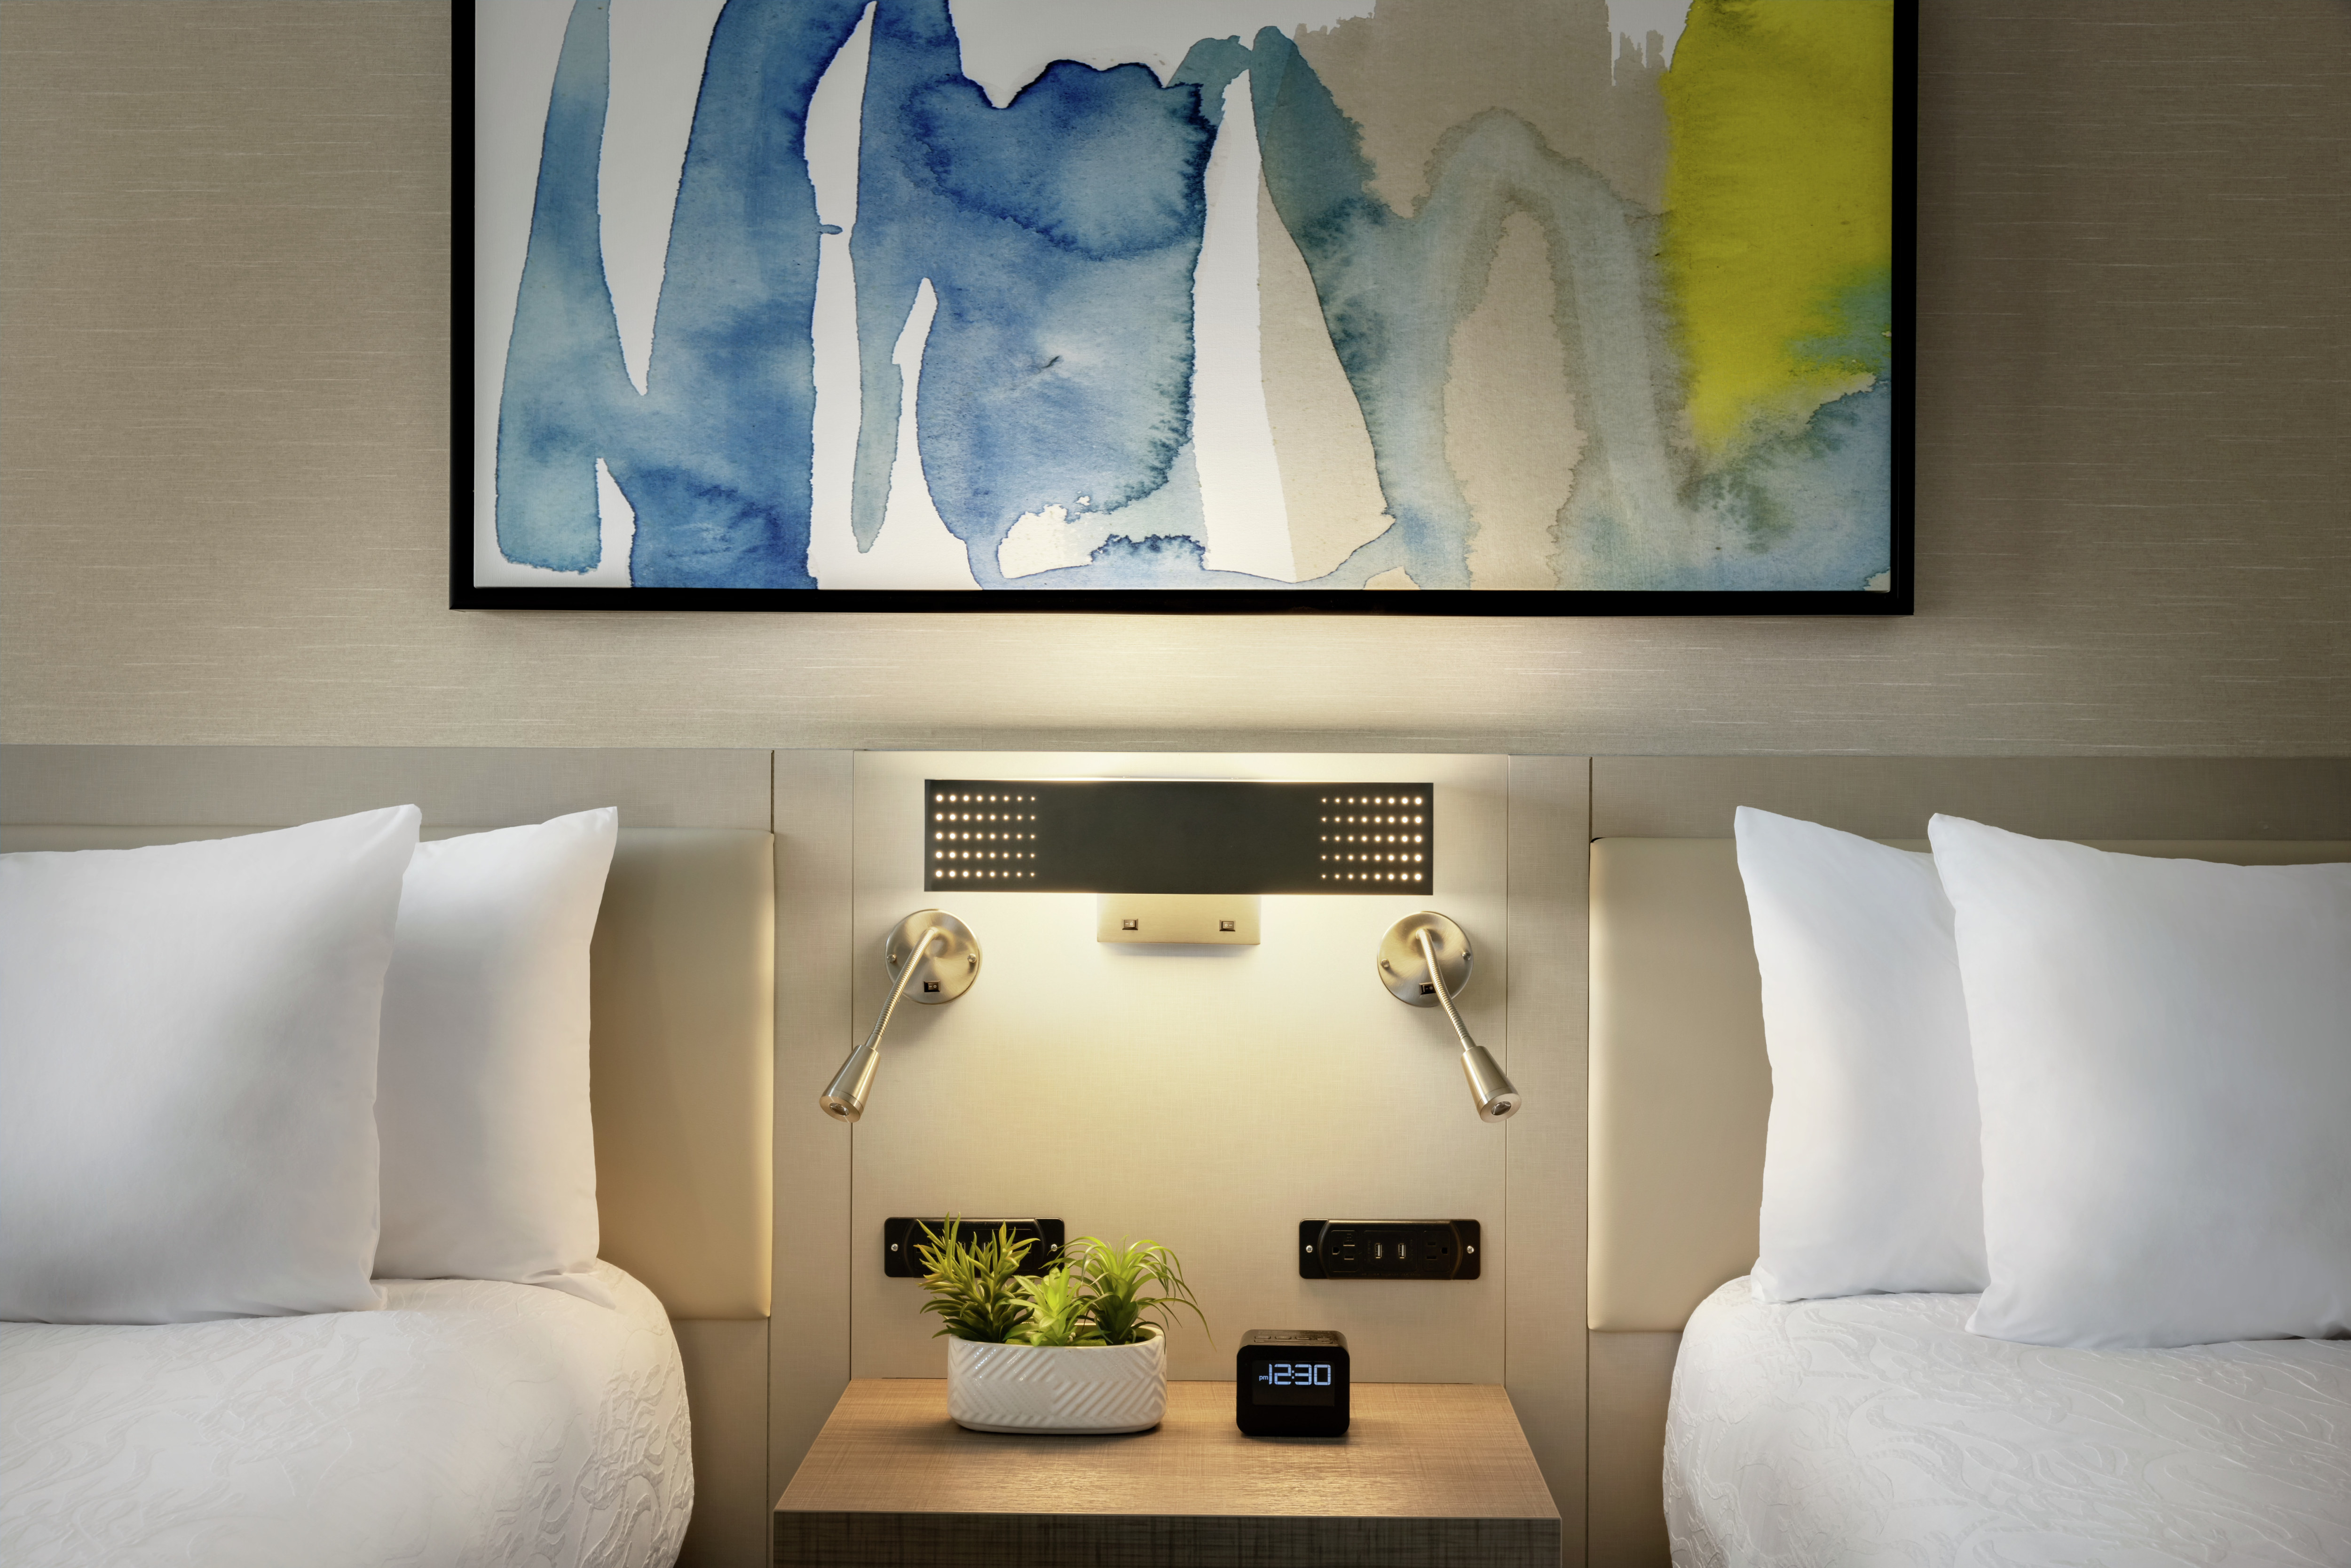 Stylish guest room featuring two comfortable queen beds, side table, and abstract art. 